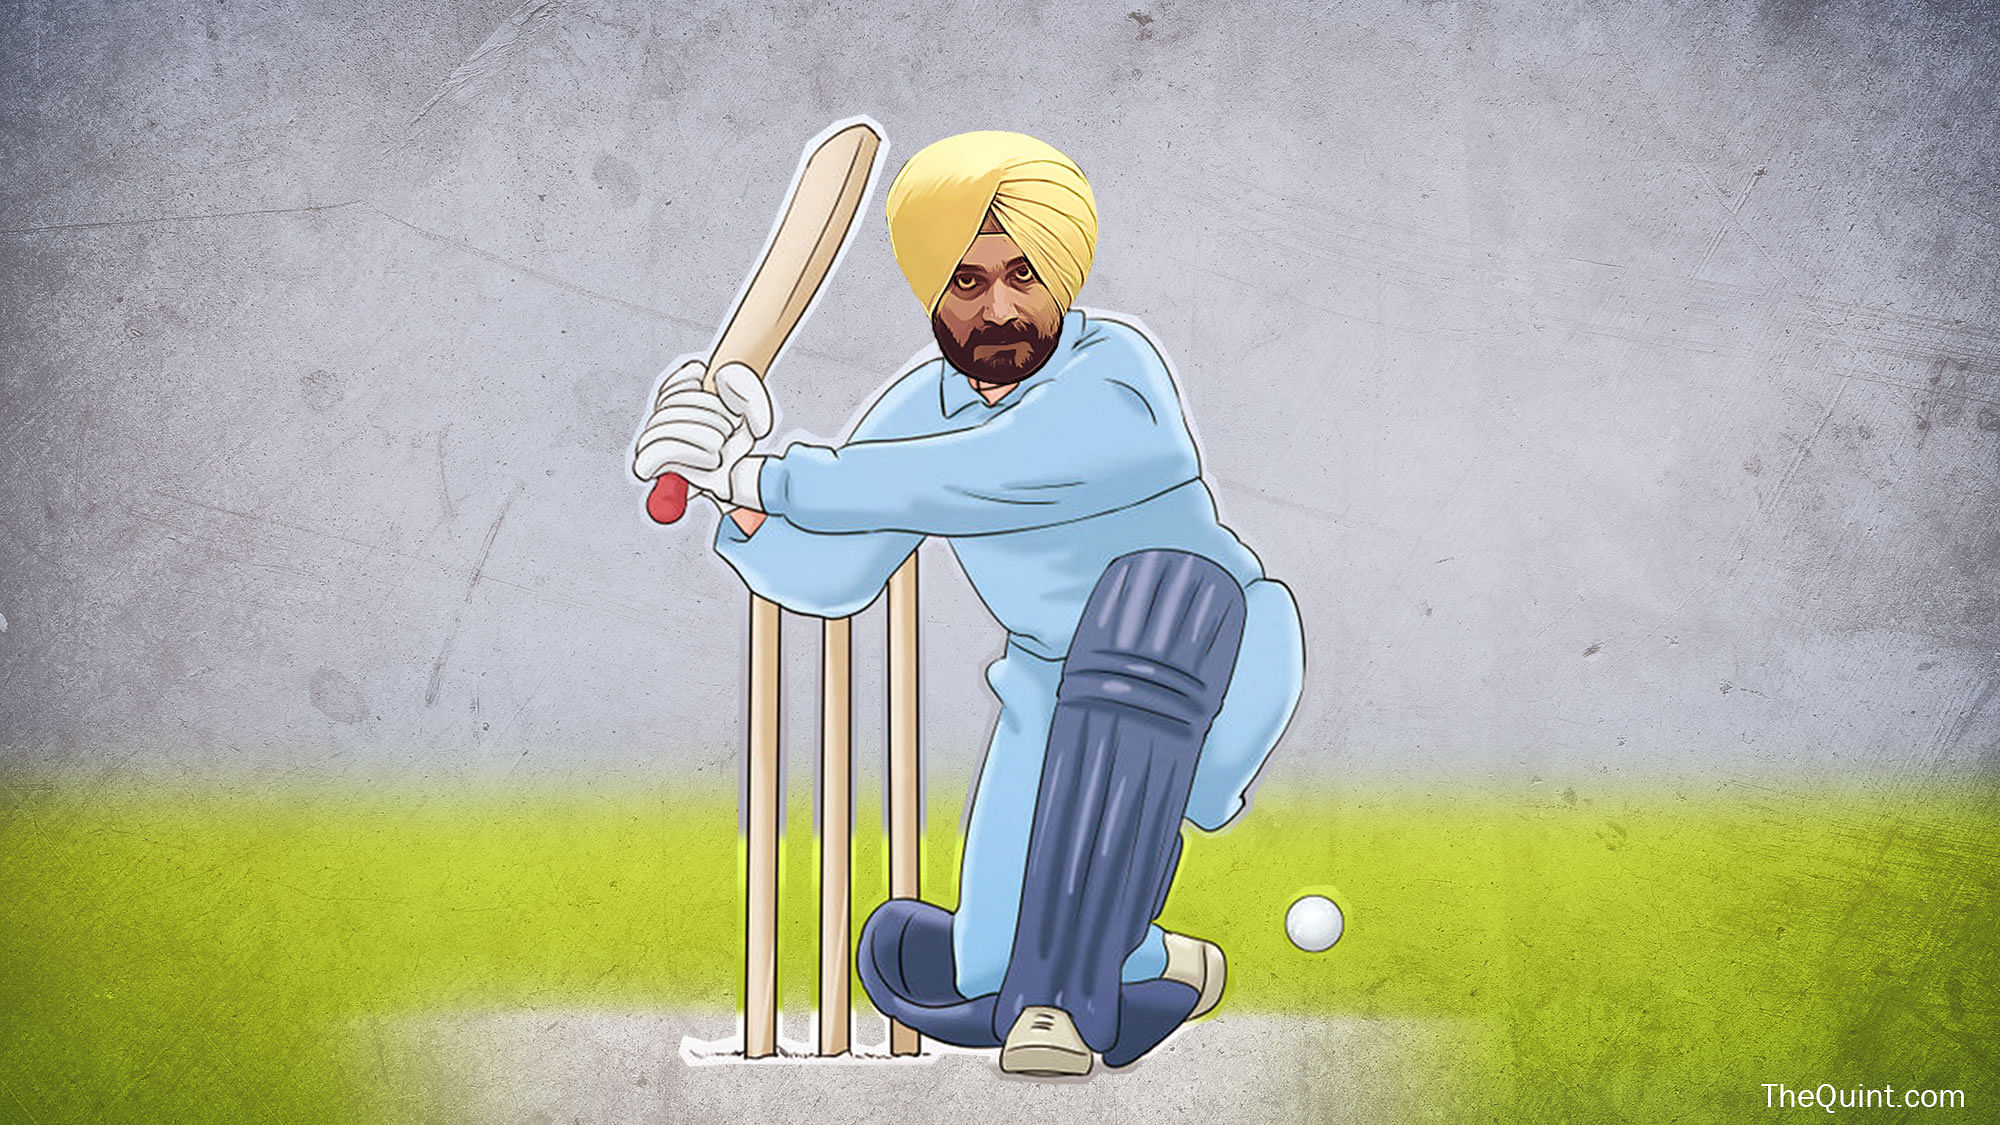 

Verbose Sidhu is letting out his political ambitions in the open, as he seems keen to take over from Capt Amarinder.